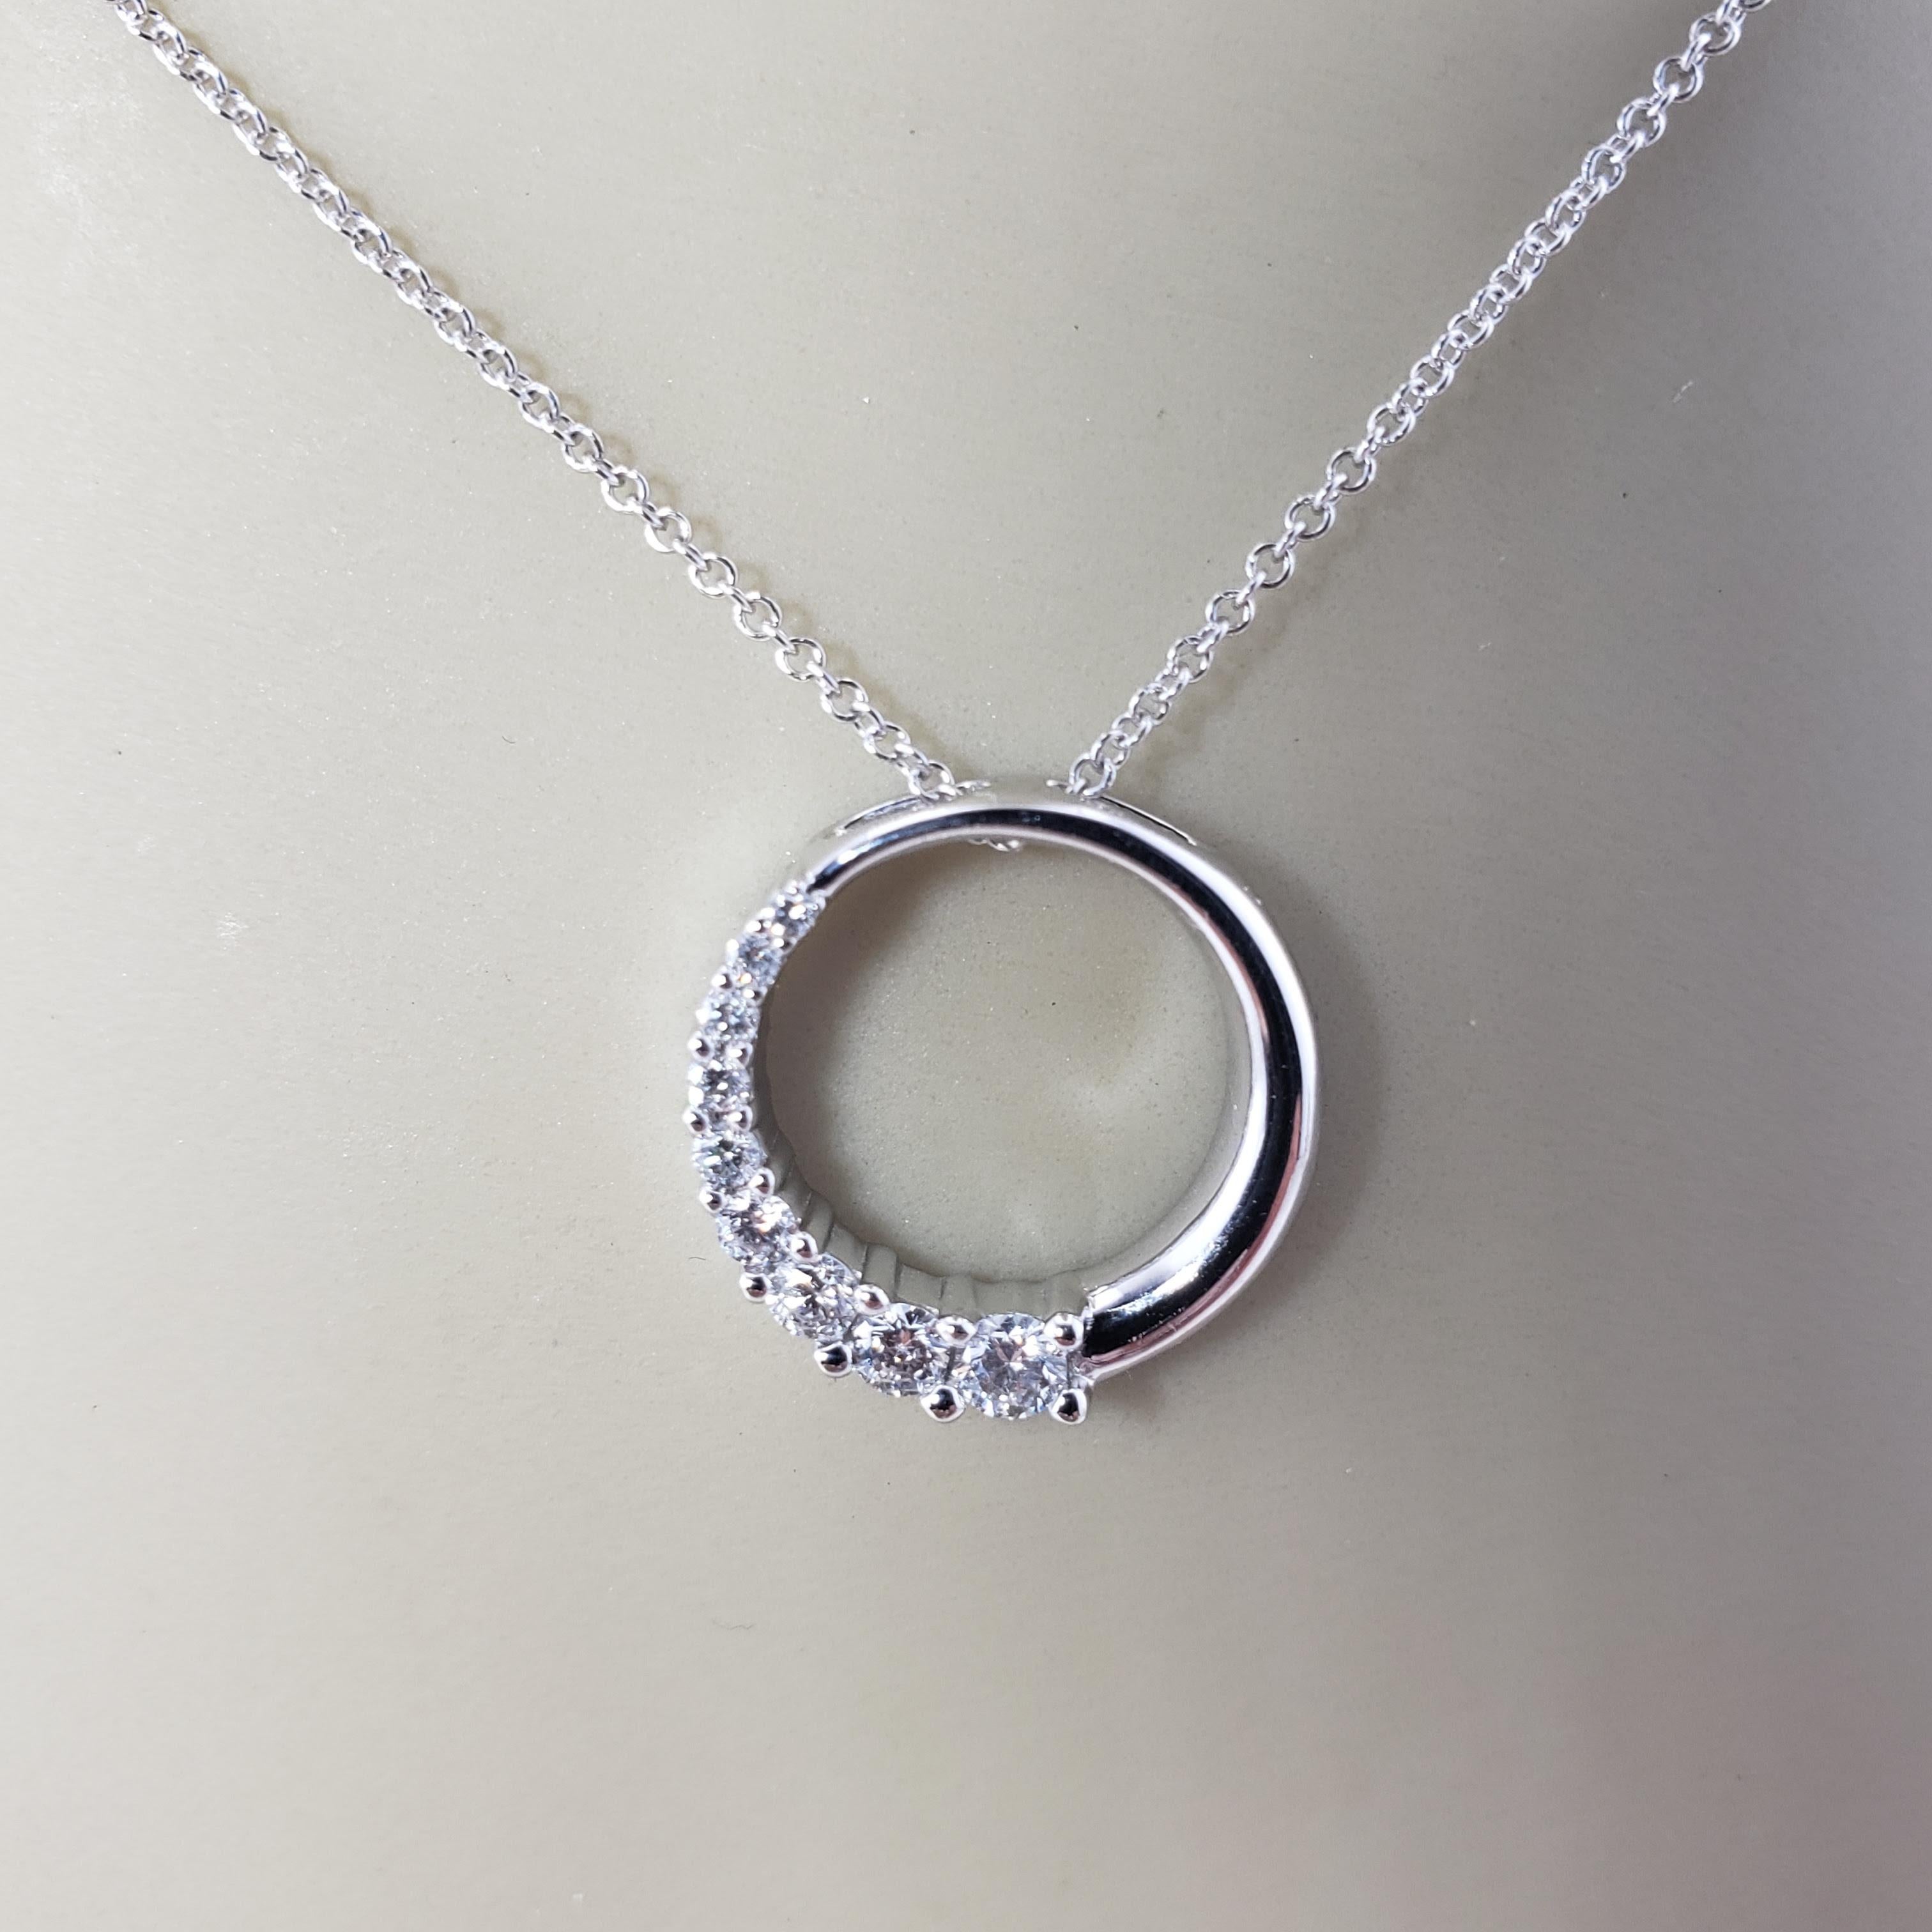 14 Karat White Gold and Diamond Circle Pendant Necklace For Sale 4